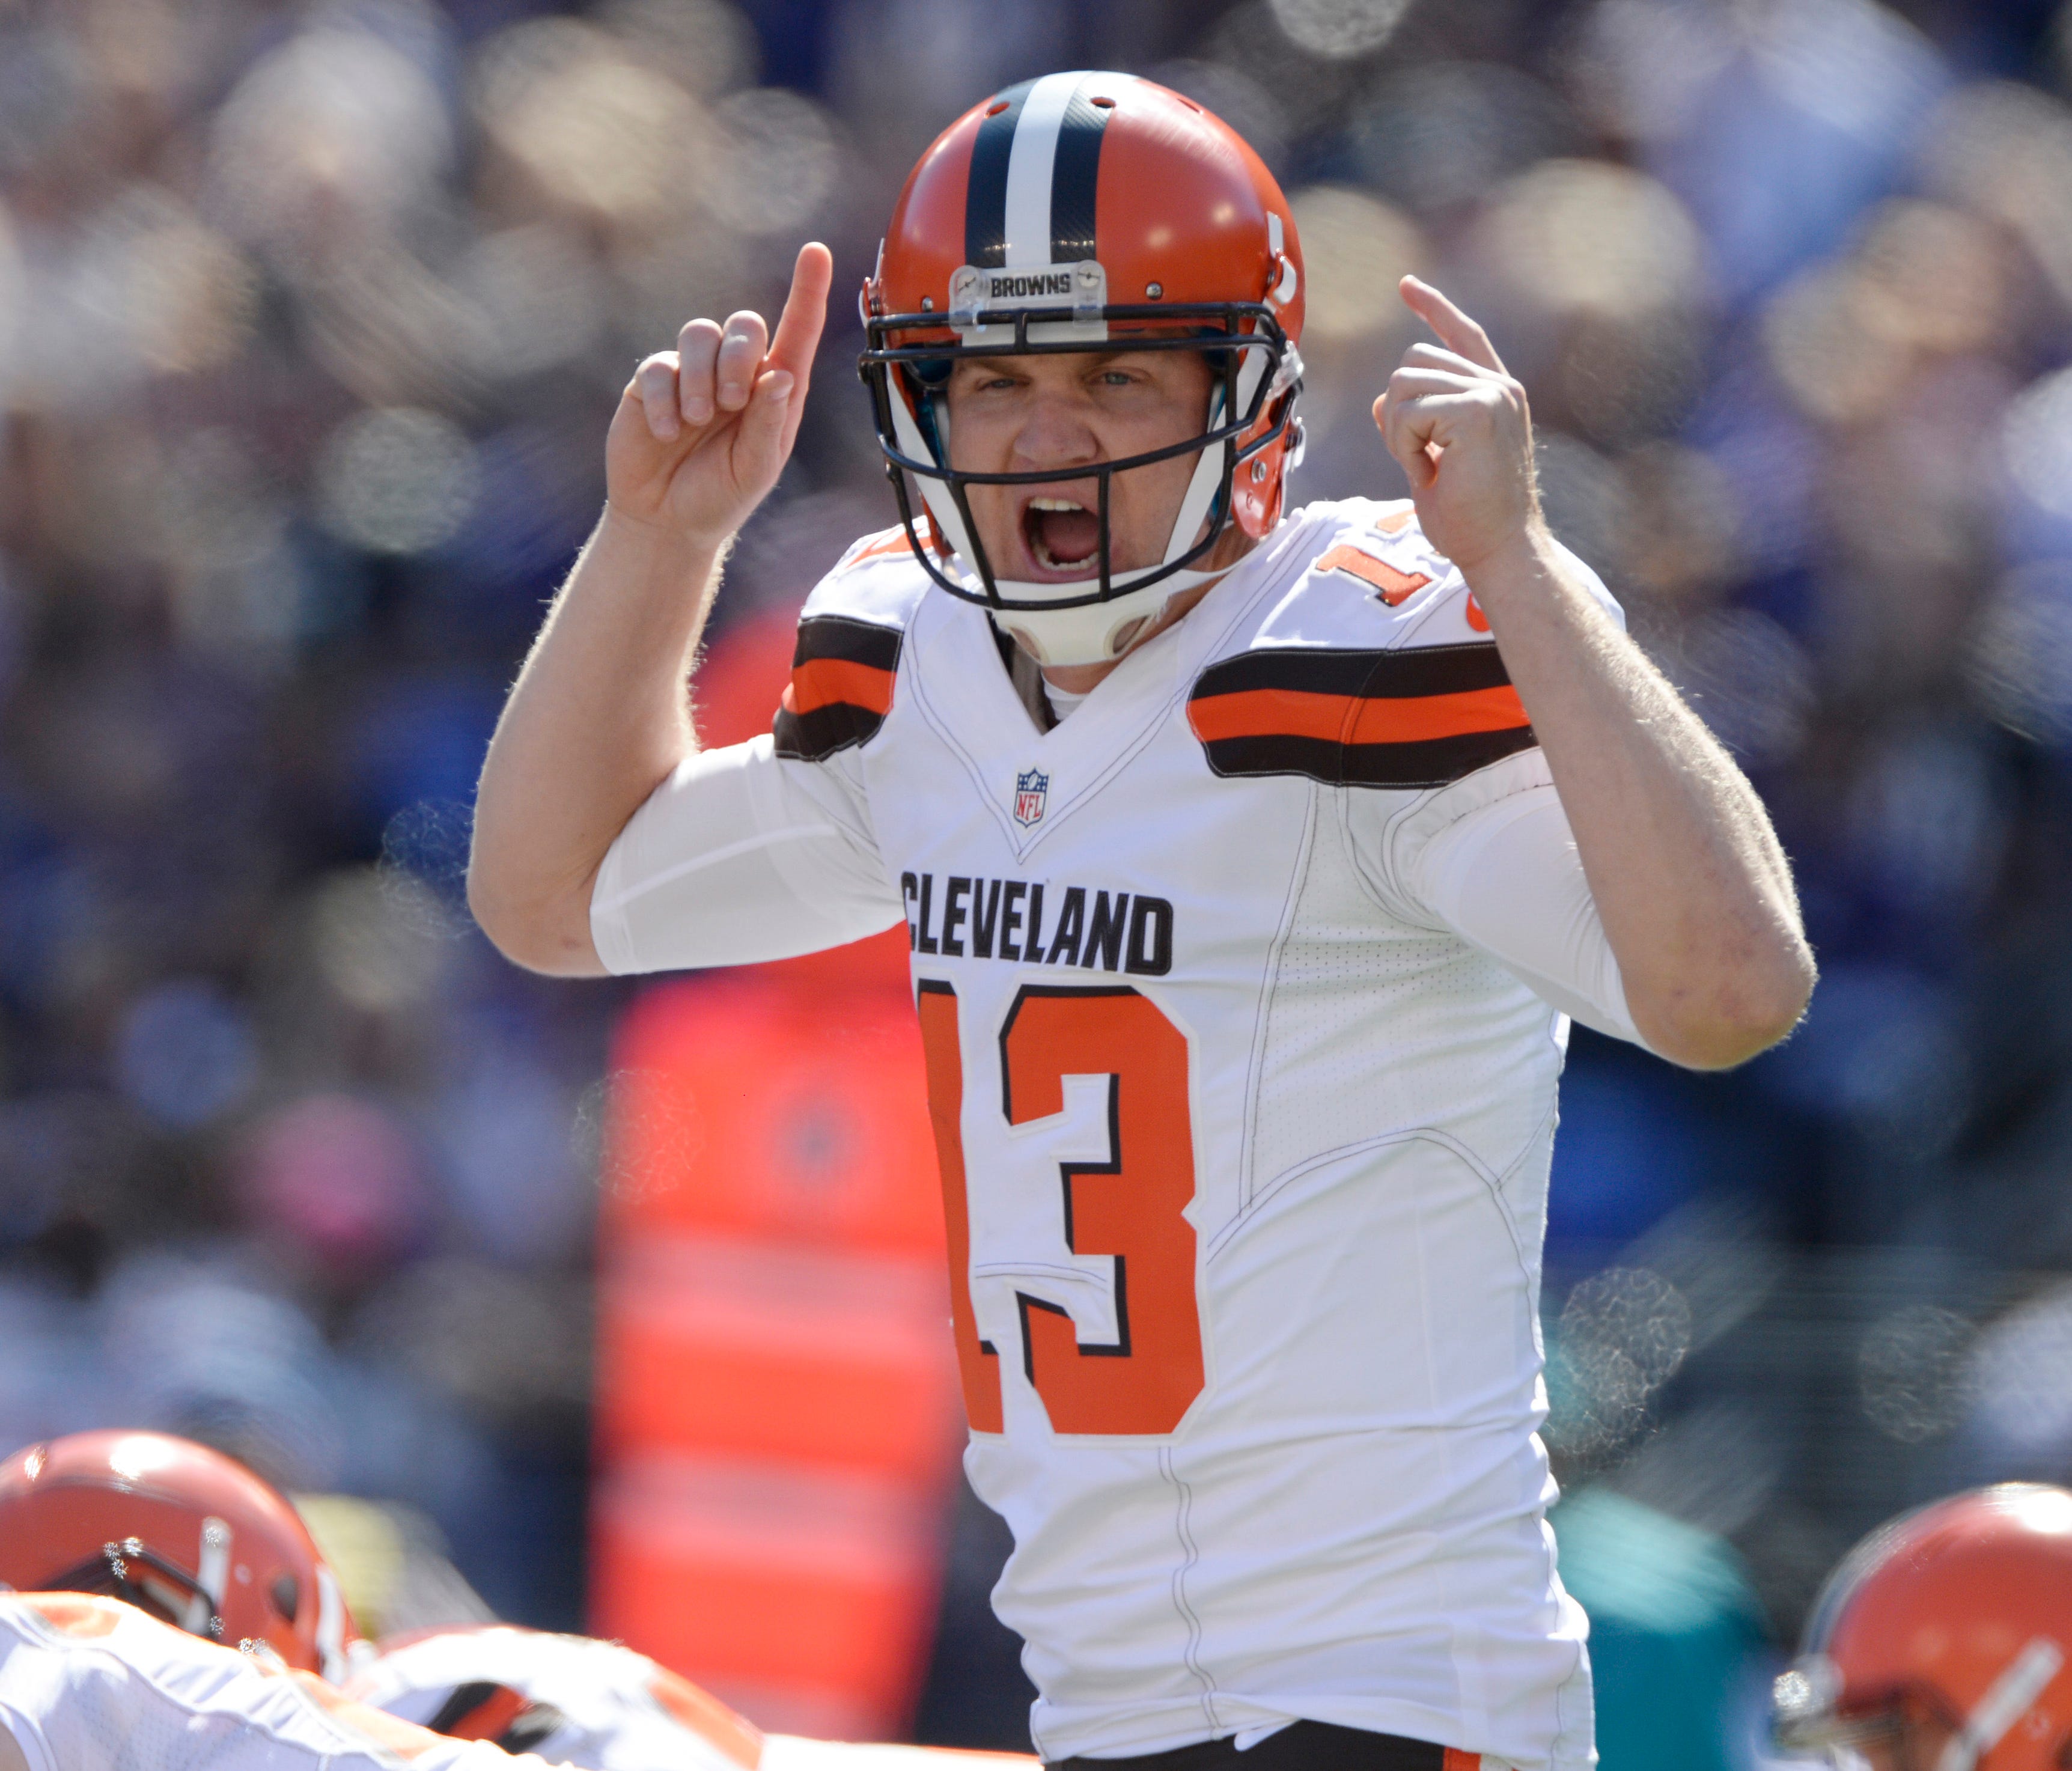 Cleveland Browns quarterback Josh McCown (13) calls out the play at the line during the second quarter against the Baltimore Ravens at M&T Bank Stadium.